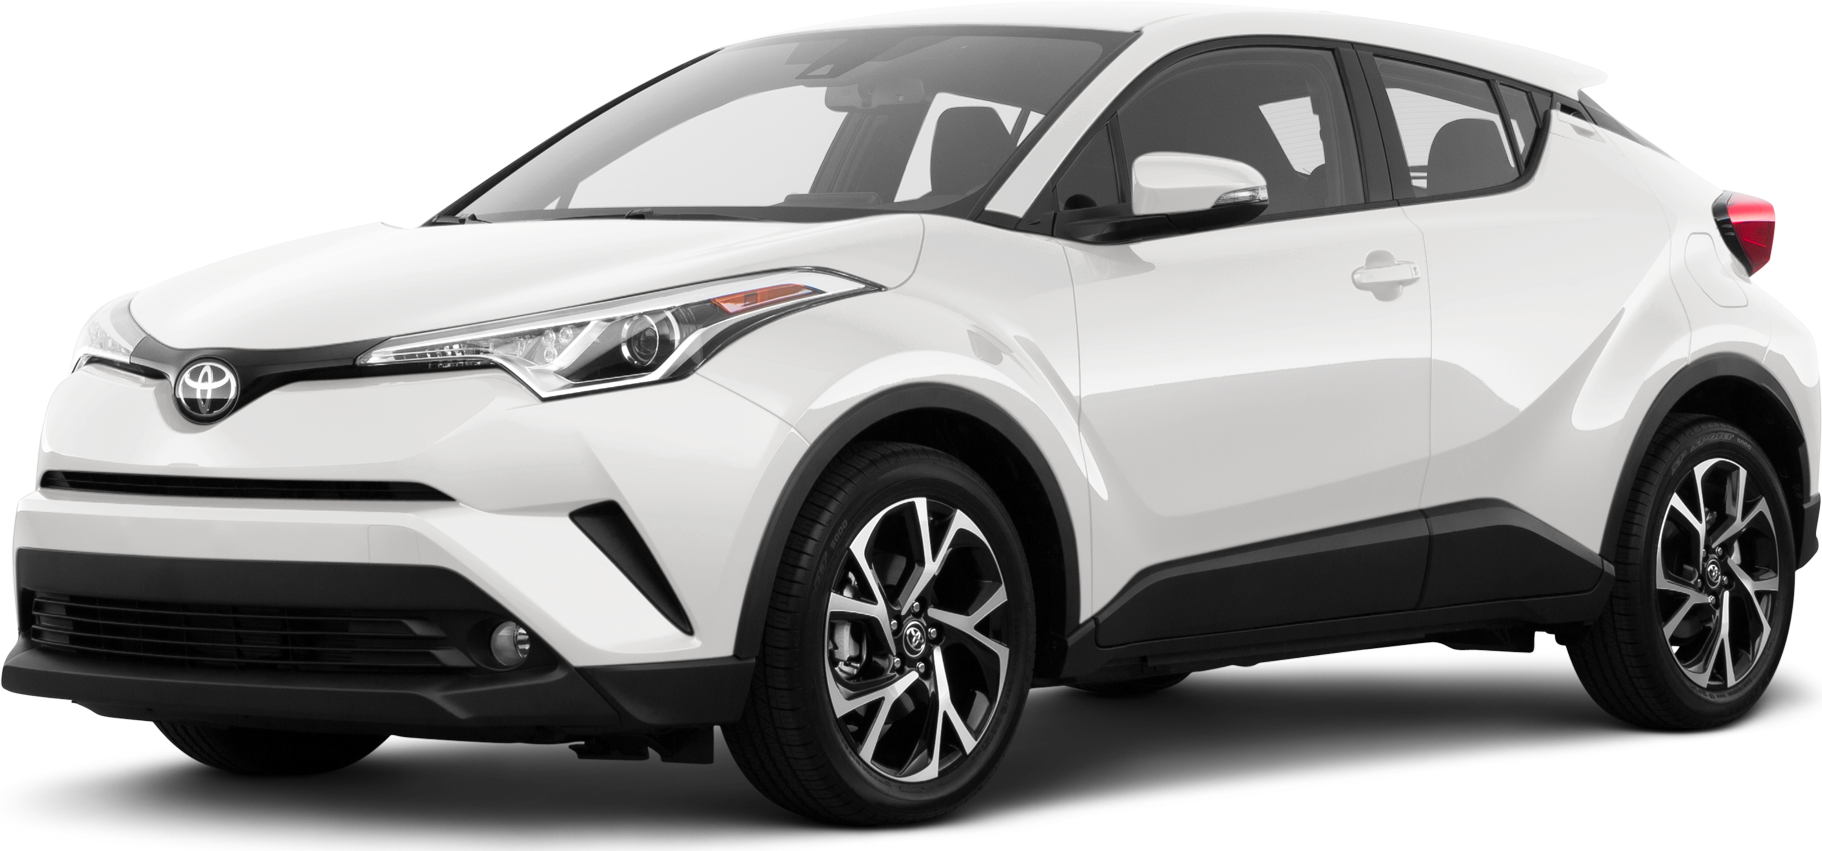 2018 Toyota C-HR Review & Ratings